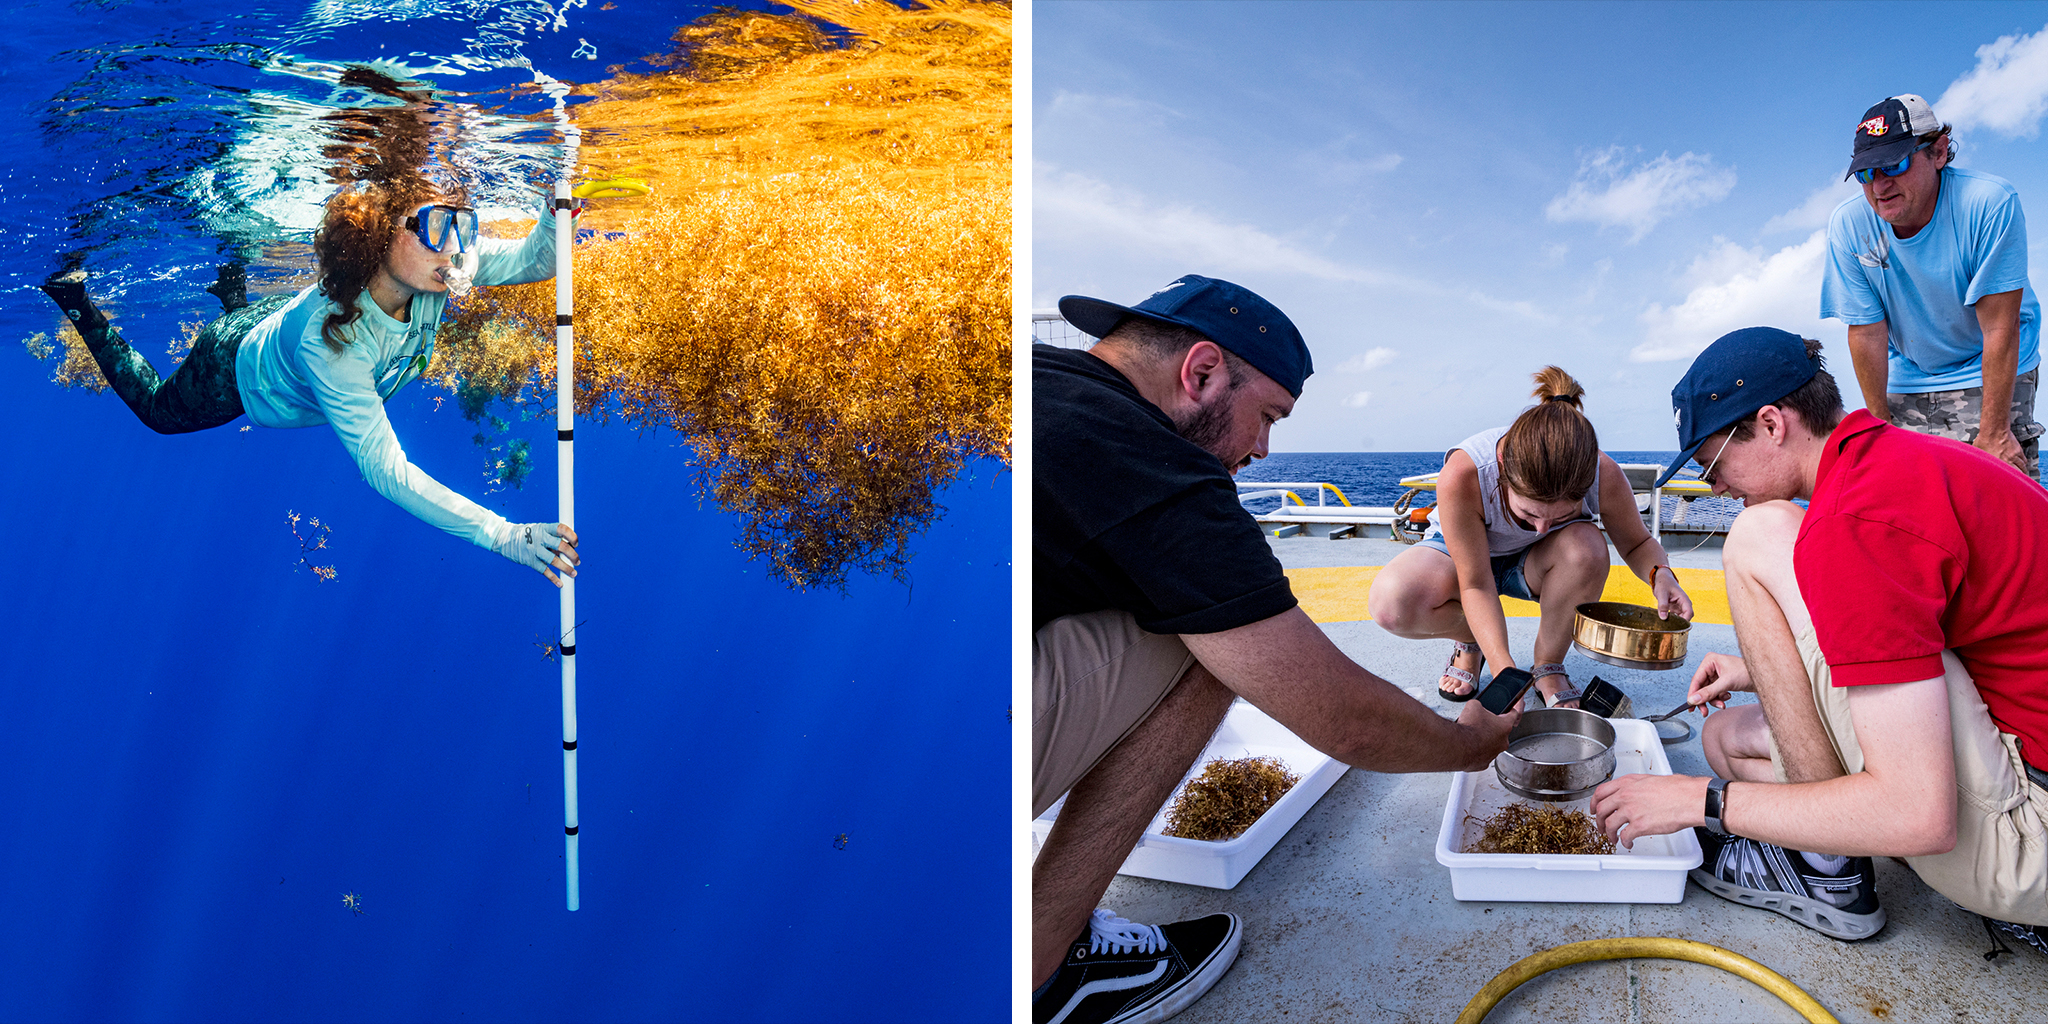 (L) University of Florida scientist Nerine Constant measures a mat of sargassum seaweed as part of the study to see if sargassum might act as an incubator to sea turtles. (R) Scientists sort microplastics shortly after trawling for it in the Sargasso Sea. (Shane Gross—Greenpeace.)